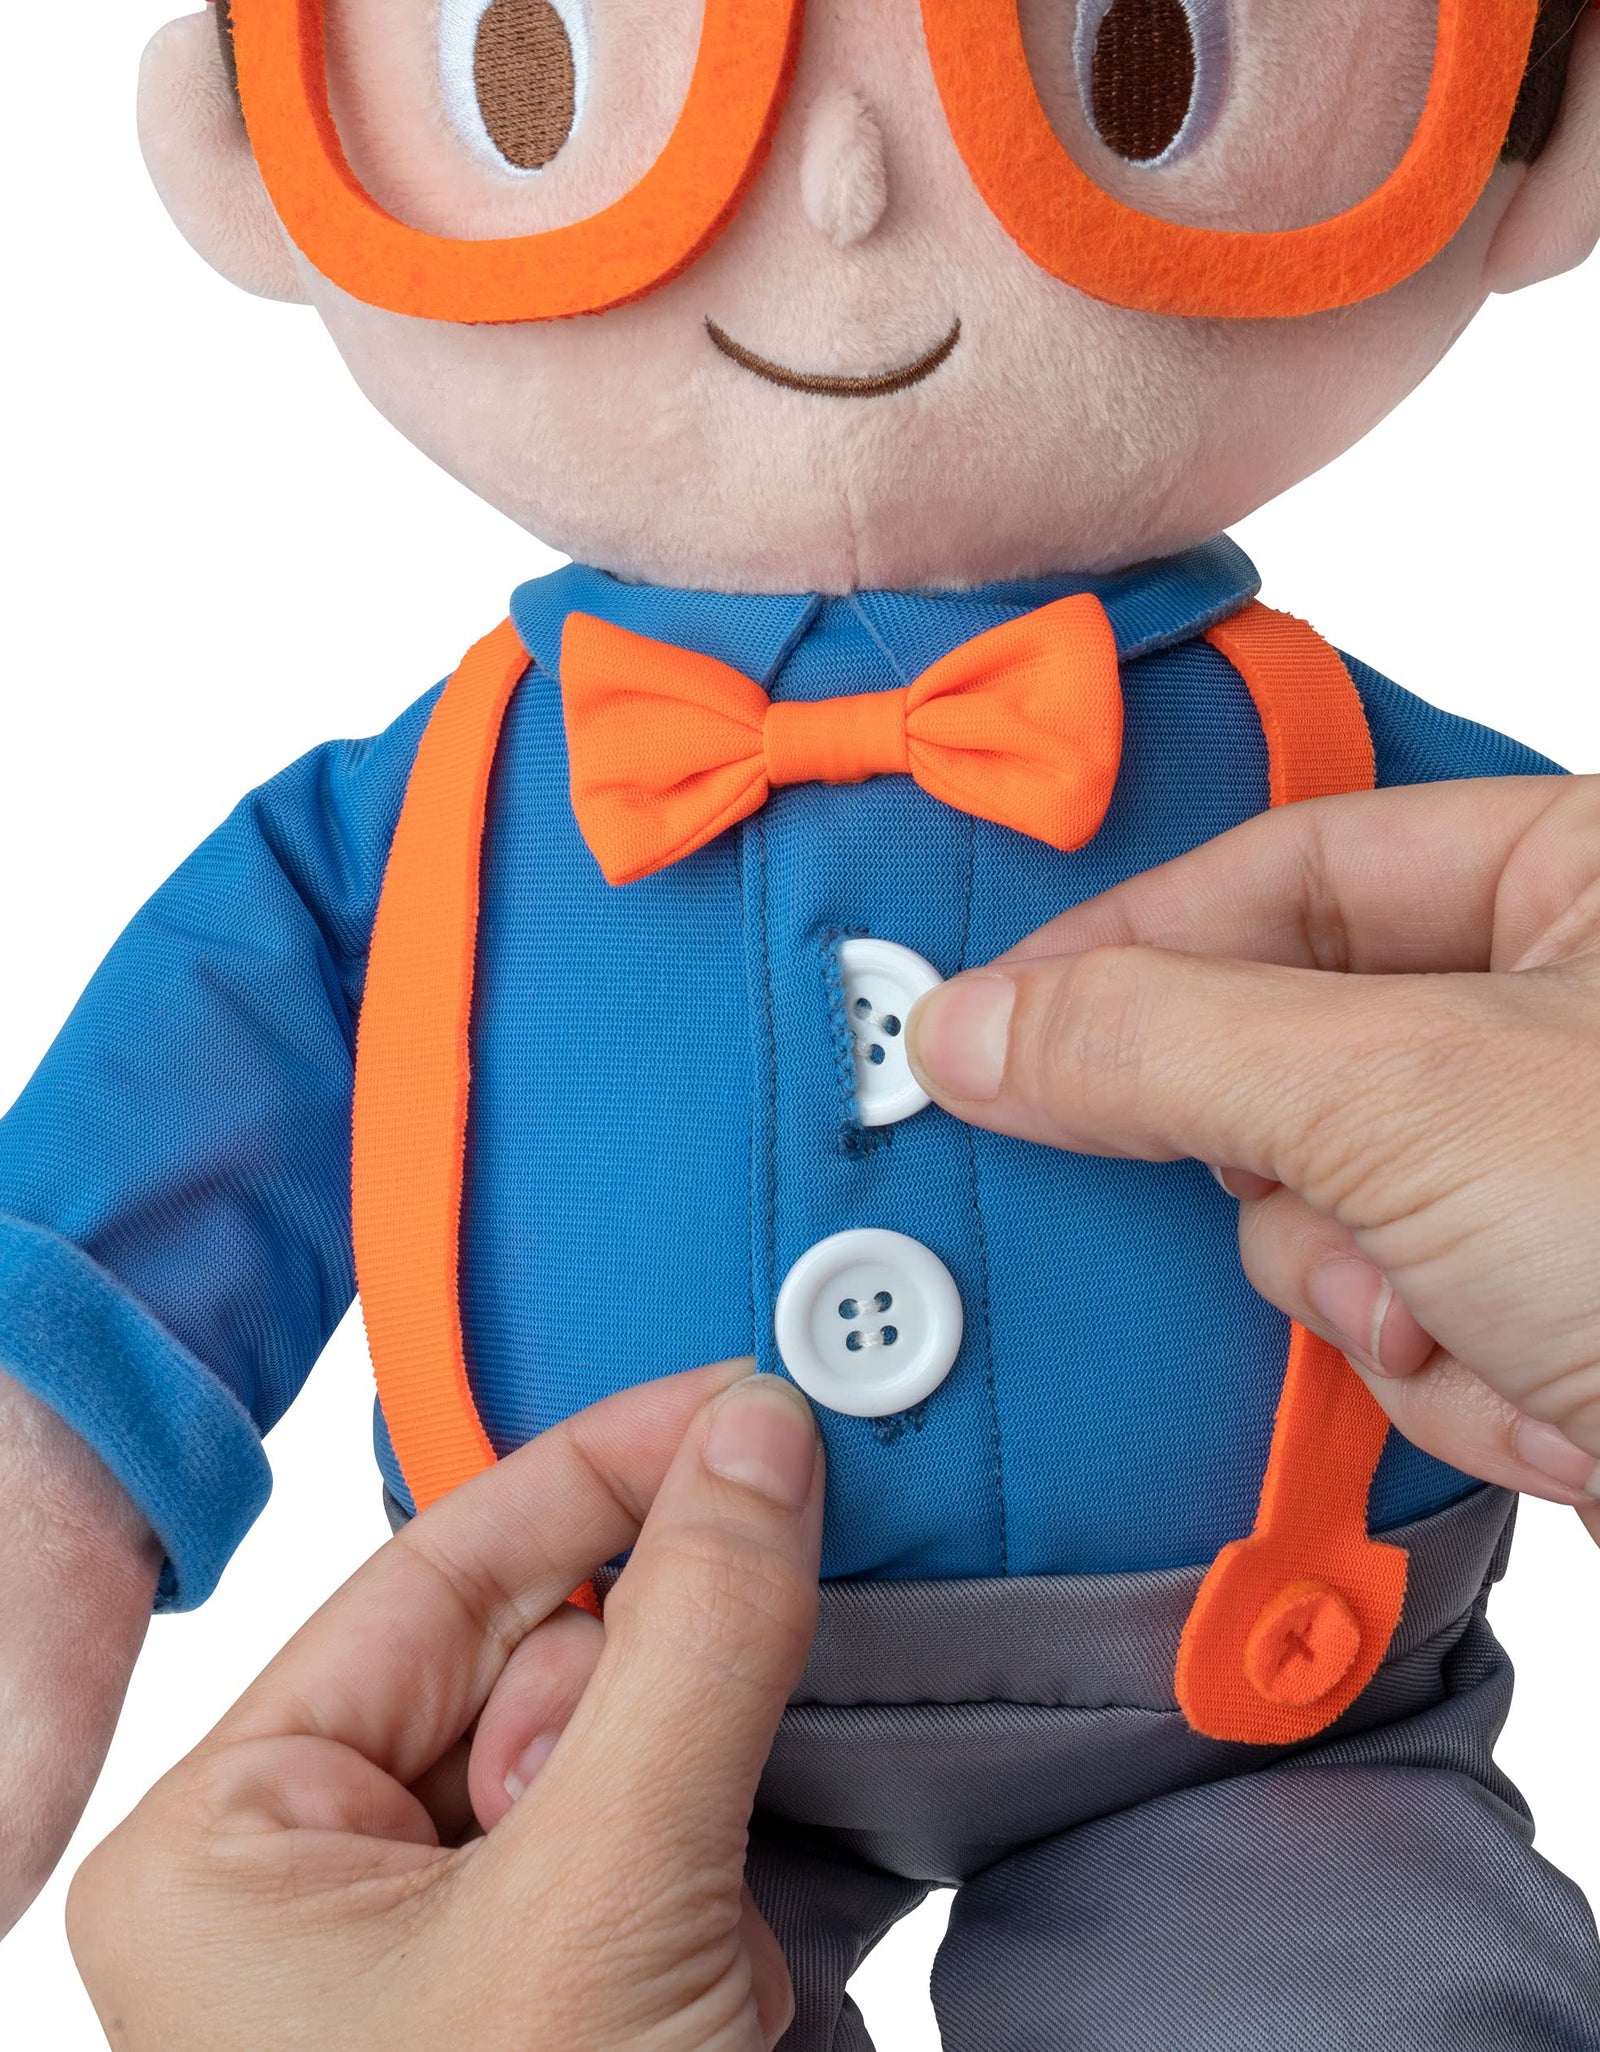 Blippi Get Ready and Play Plush - 20-inch Dress Up Plush with Sounds, Teaches Children to Tie Shoes, Button Shirts, Snap Suspenders, Zip Vest-Jacket, Roll Sleeves and Socks and More - Amazon Exclusive